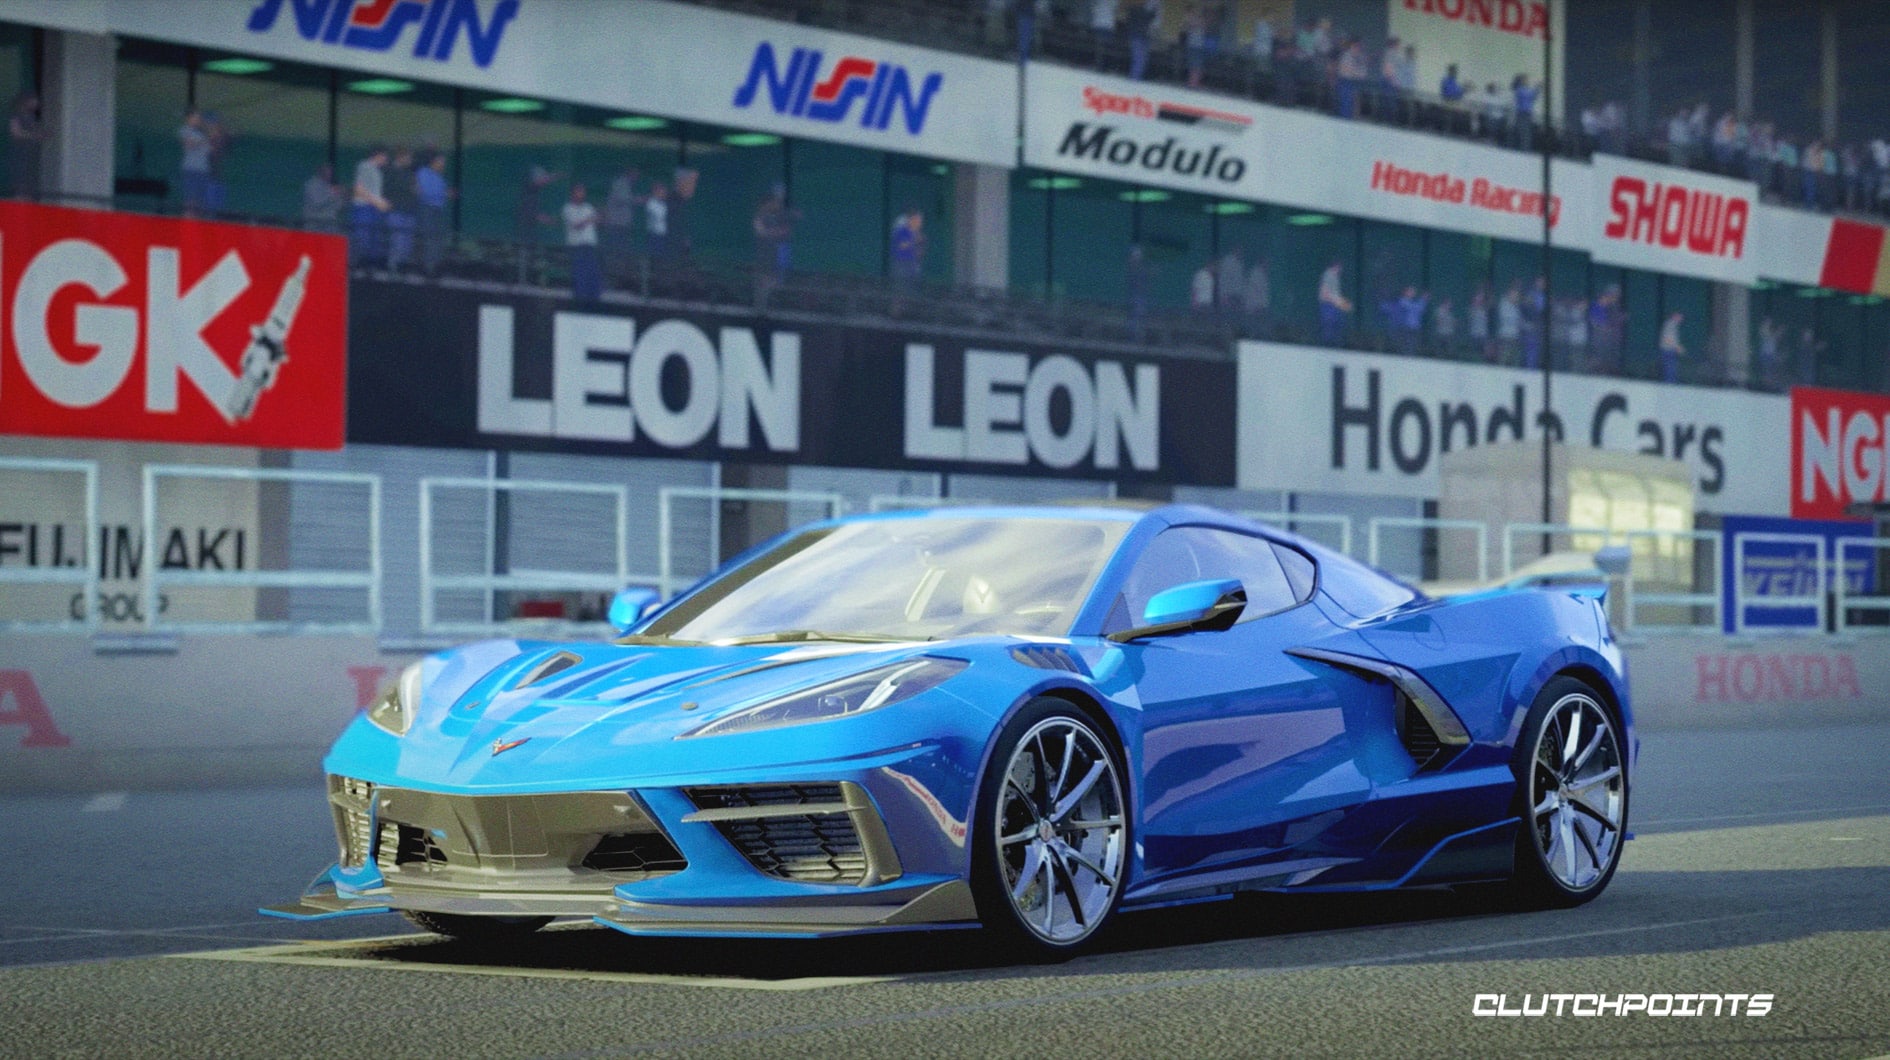 Forza Motorsport: Release date, platforms, gameplay & what we know